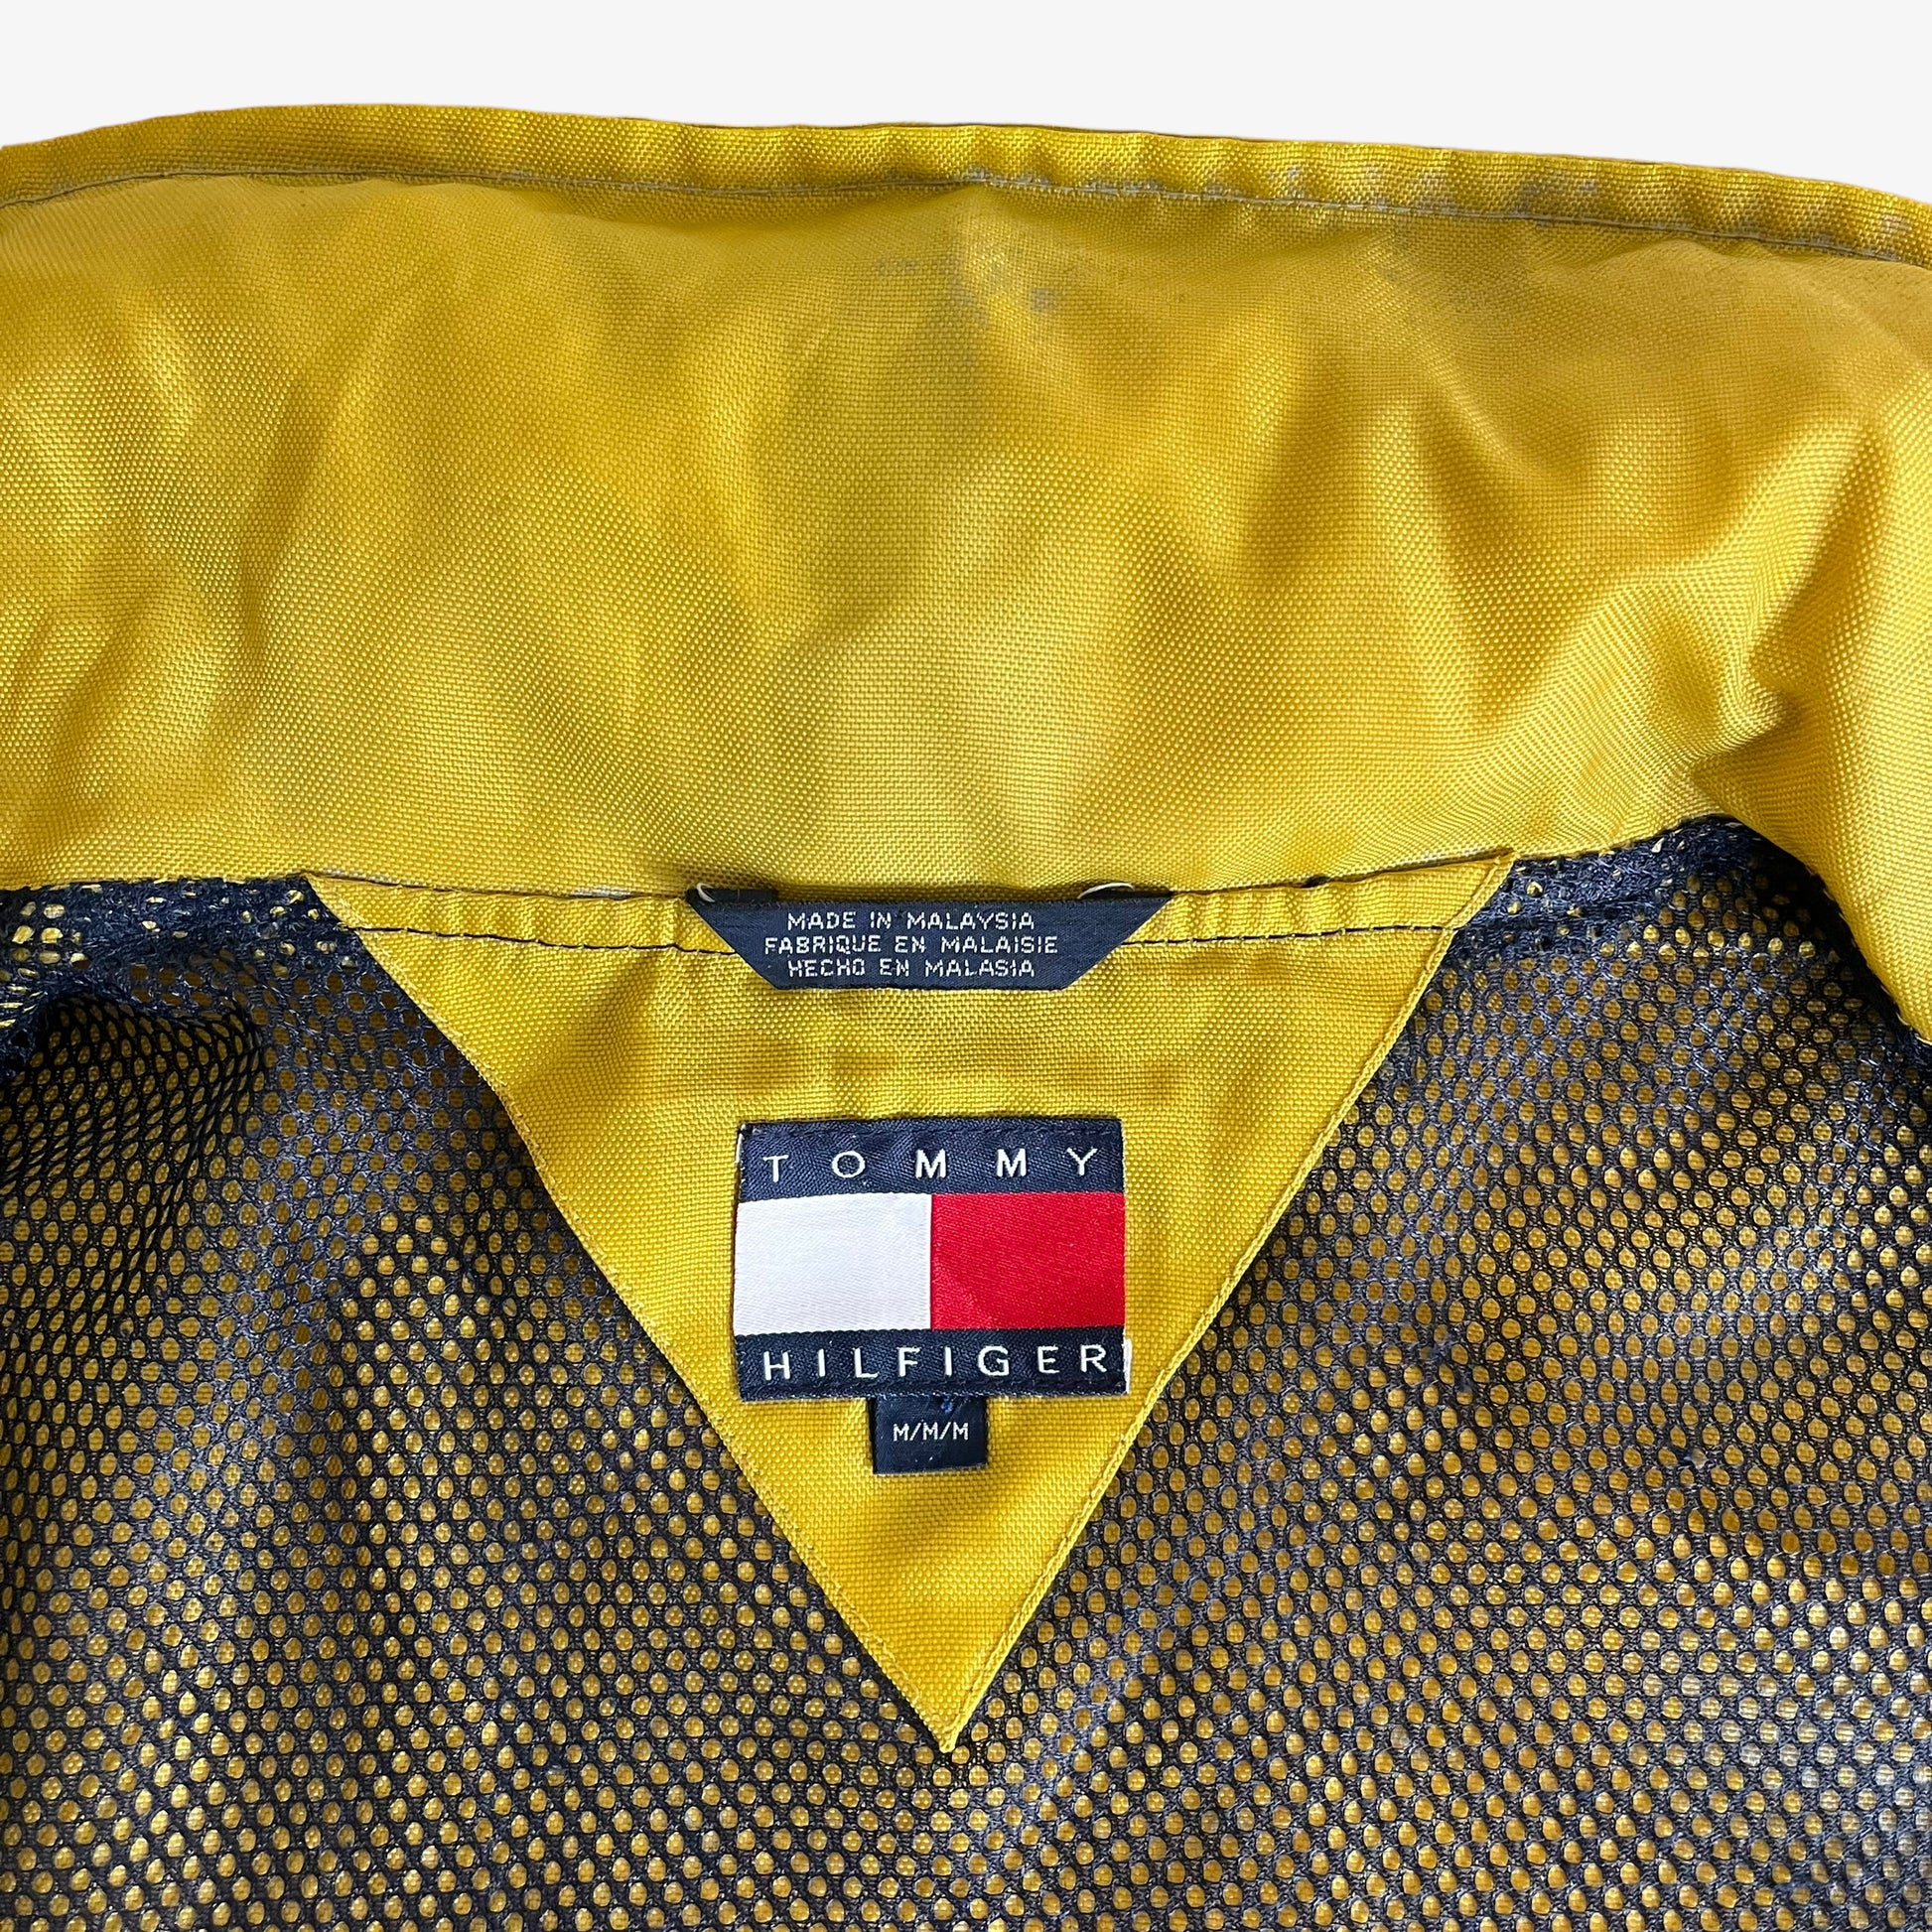 Vintage 90s Tommy Hilfiger Yellow Sailing Gear Jacket With Hook Fasteners Label - Casspios Dream